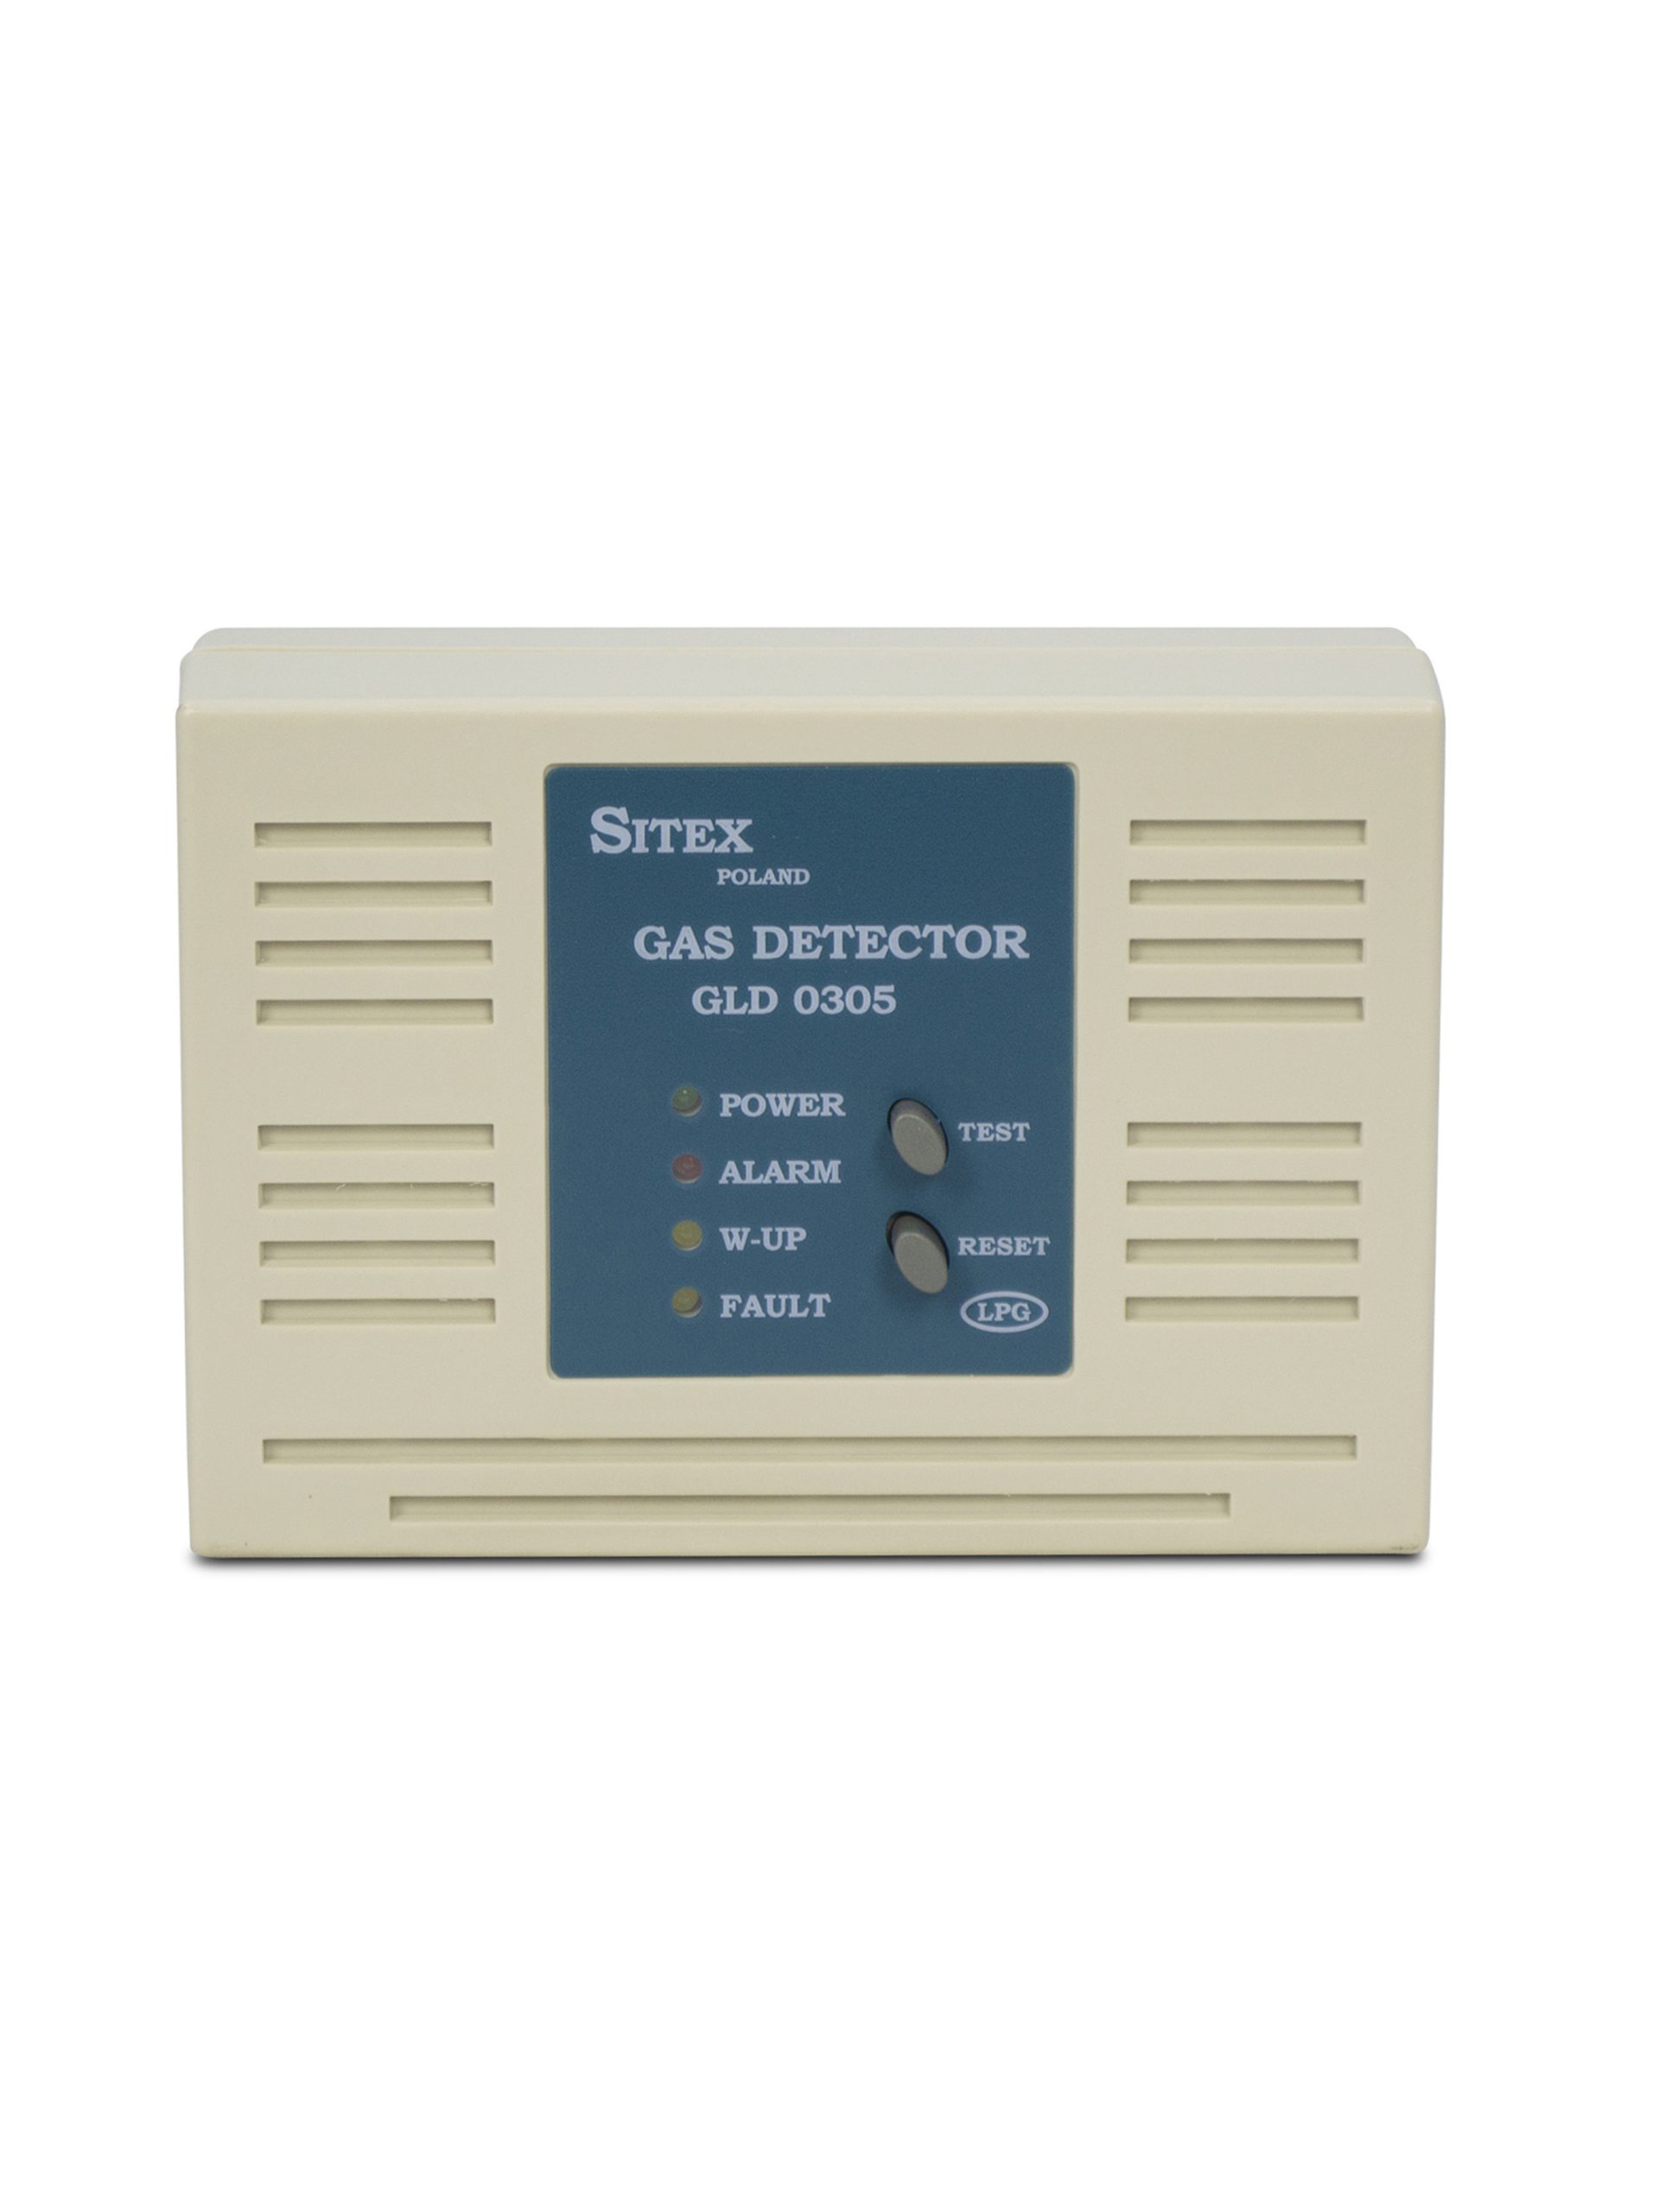 GAS DETECTOR SITEX FOR LPG WITH TWO RELAYS from Gas Equipment Company Llc Abu Dhabi, UNITED ARAB EMIRATES